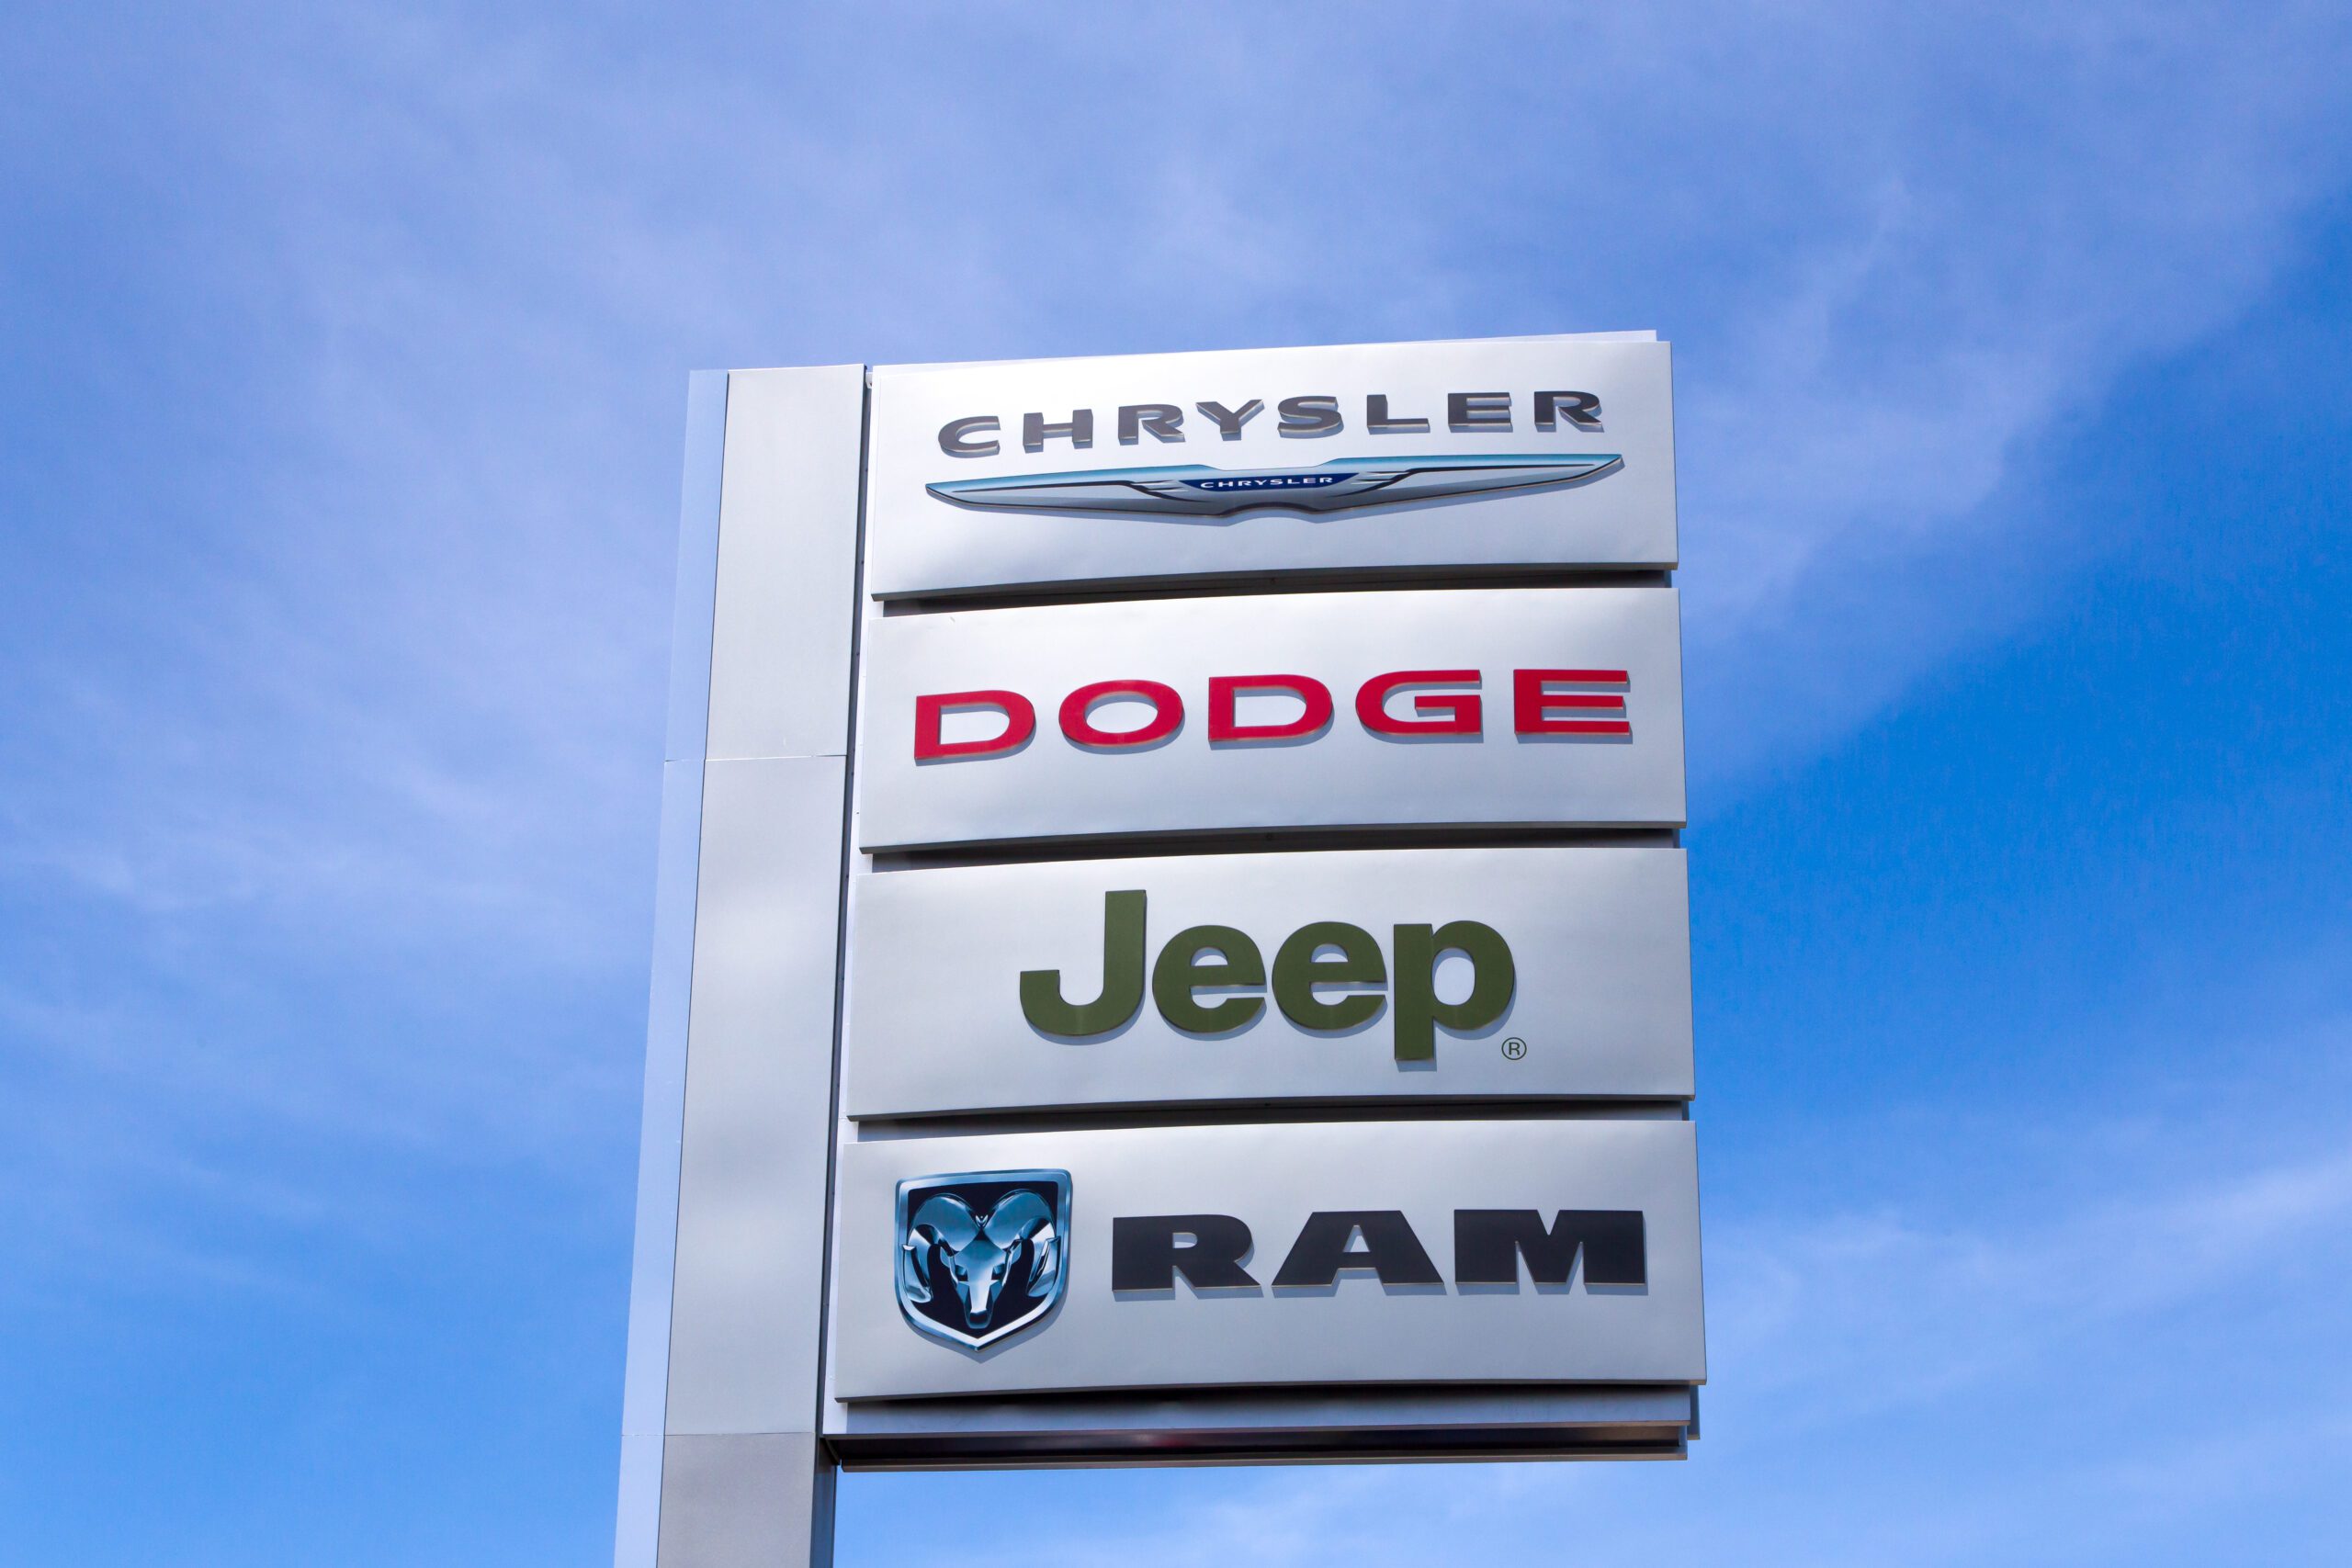 A class action lawsuit claims engines in Chrysler, Dodge, Jeep, and Ram vehicles have a defect